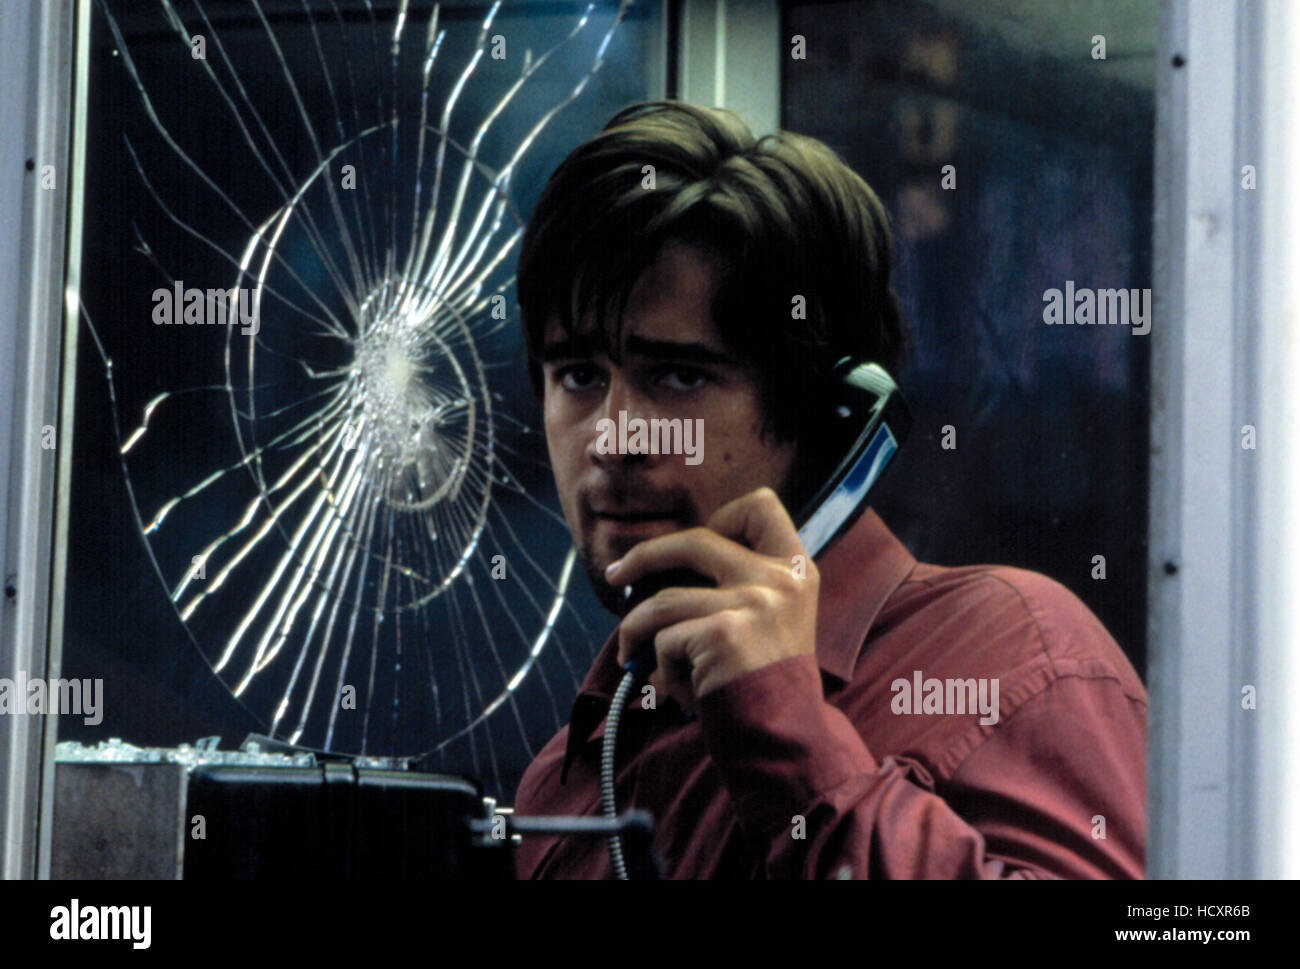 PHONE BOOTH, Colin Farrell, 2003, TM & Copyright (c) 20th Century Fox Film Corp. All rights reserved. Stock Photo